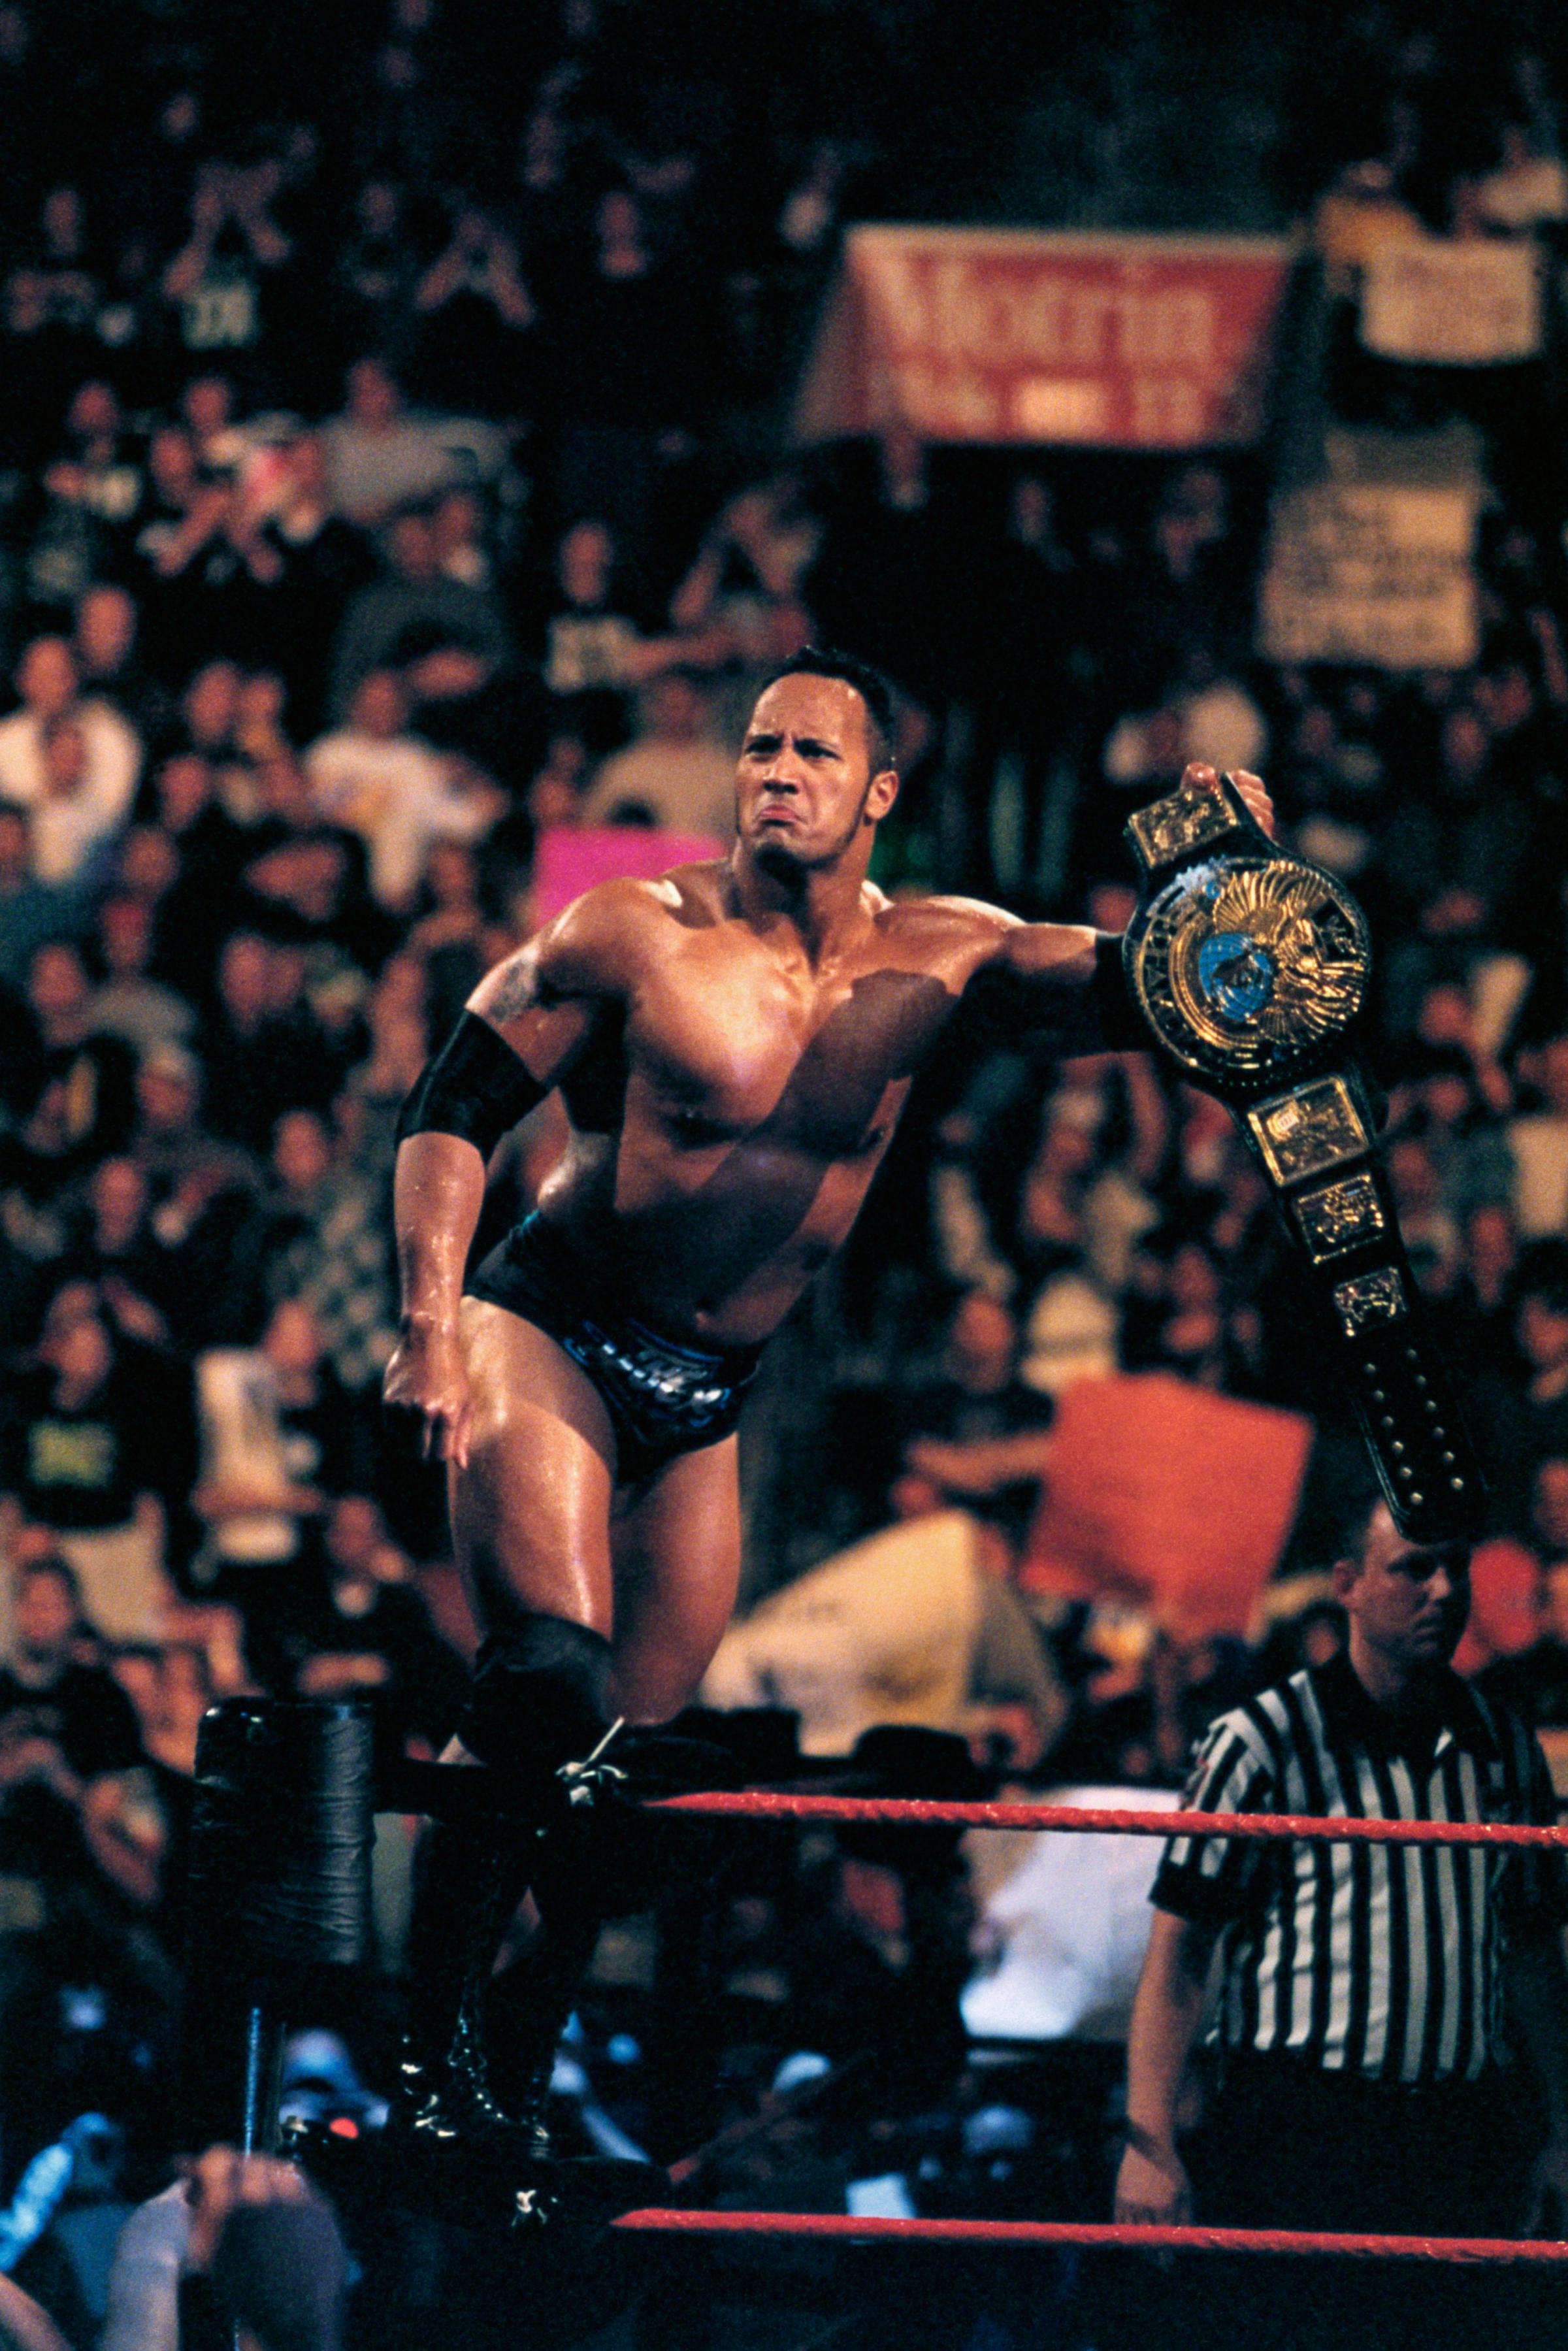 Professional Wrestler The Rock with Championship Belt